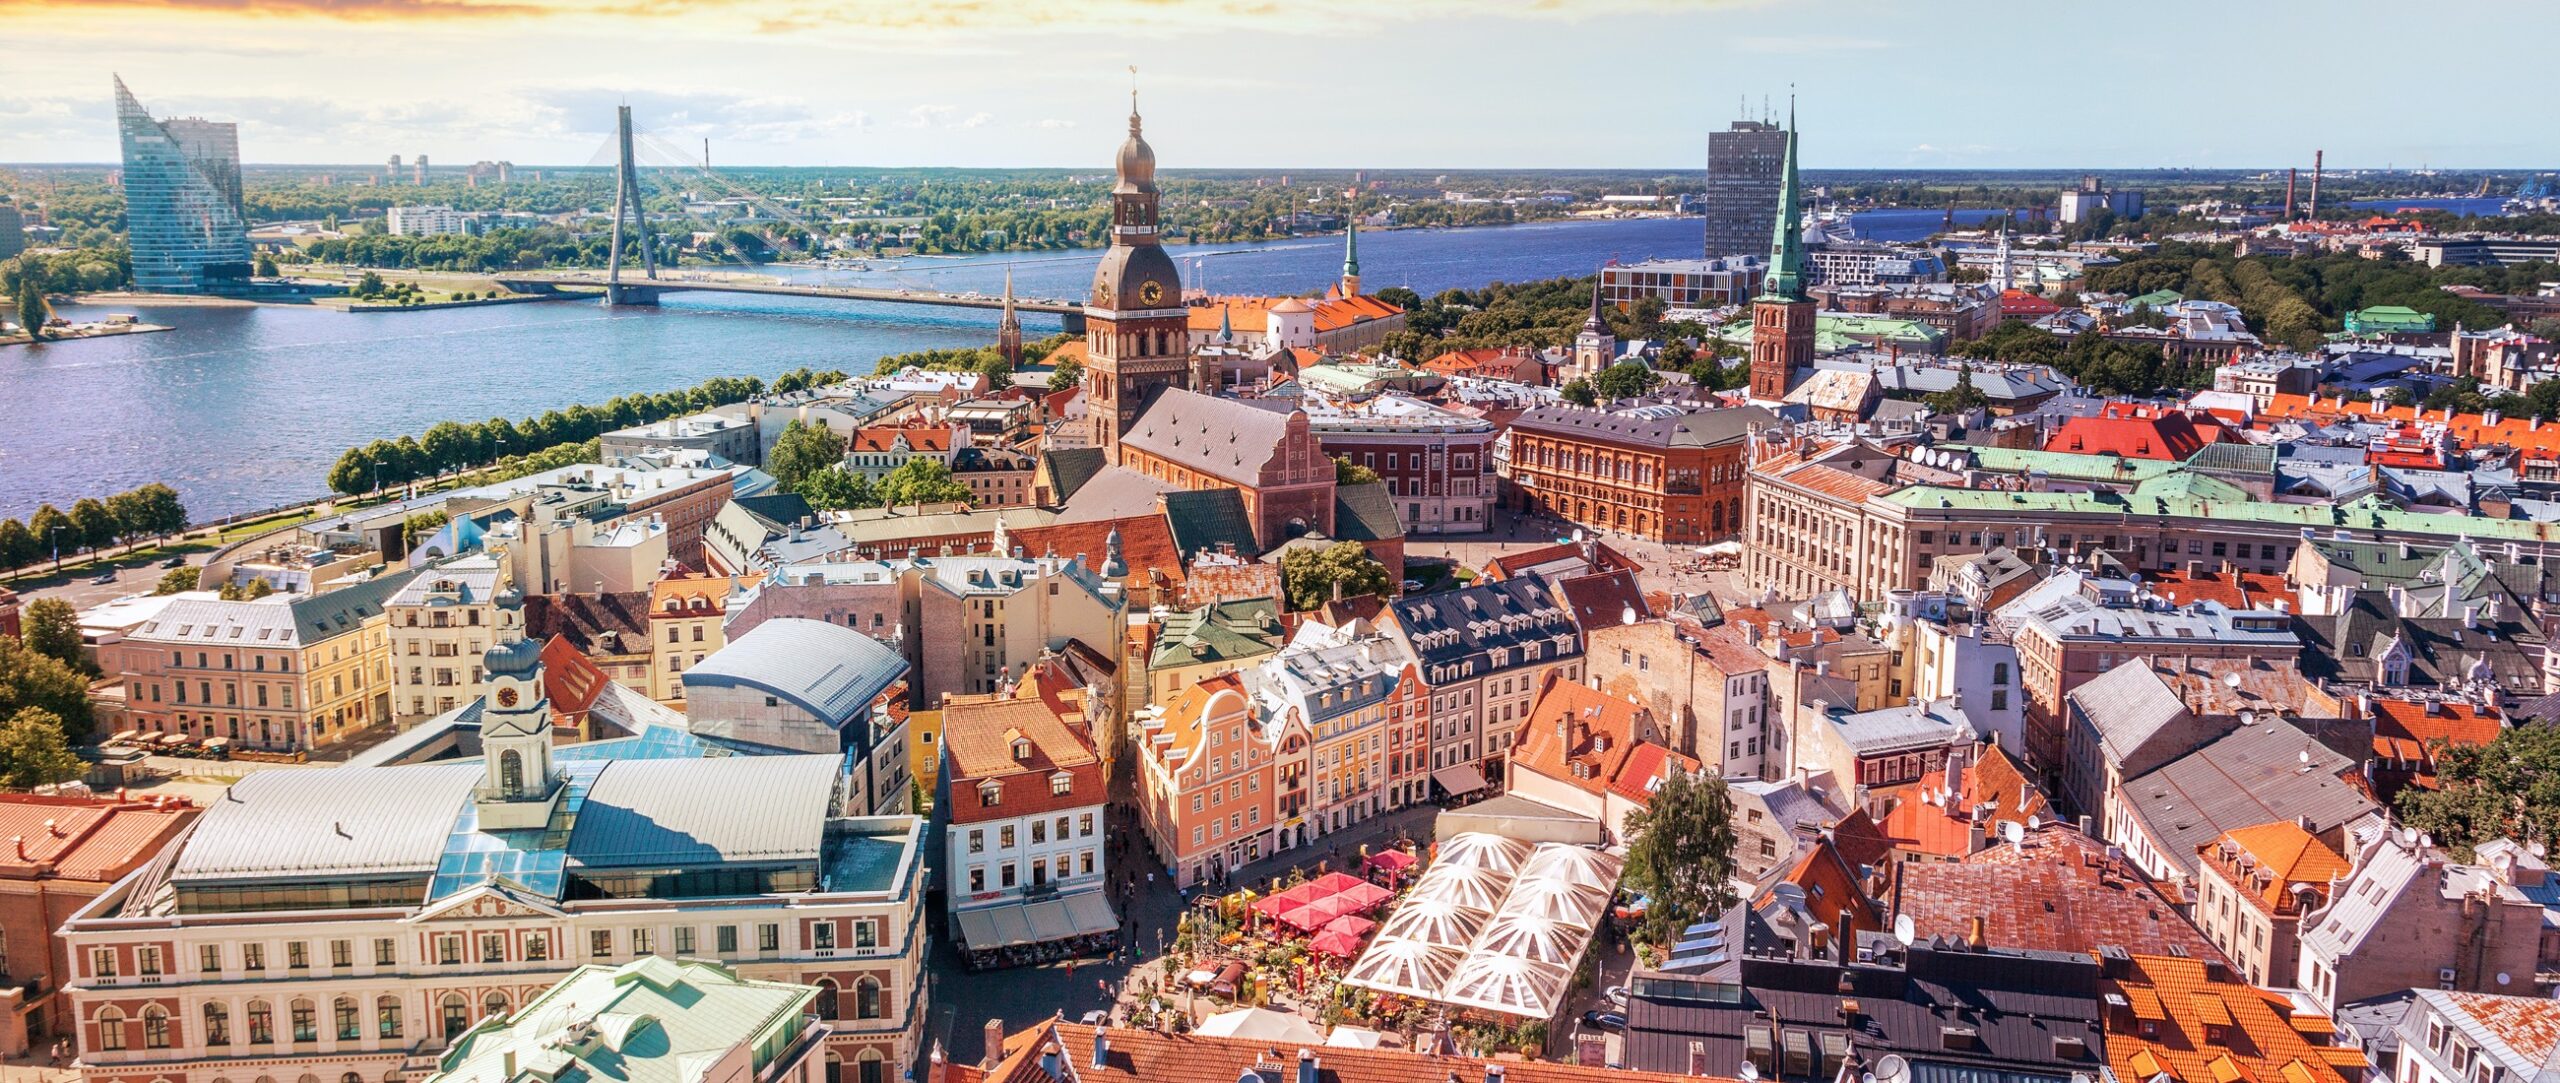 Riga – 2 Days in the Latvian Capital: Best Things to Do